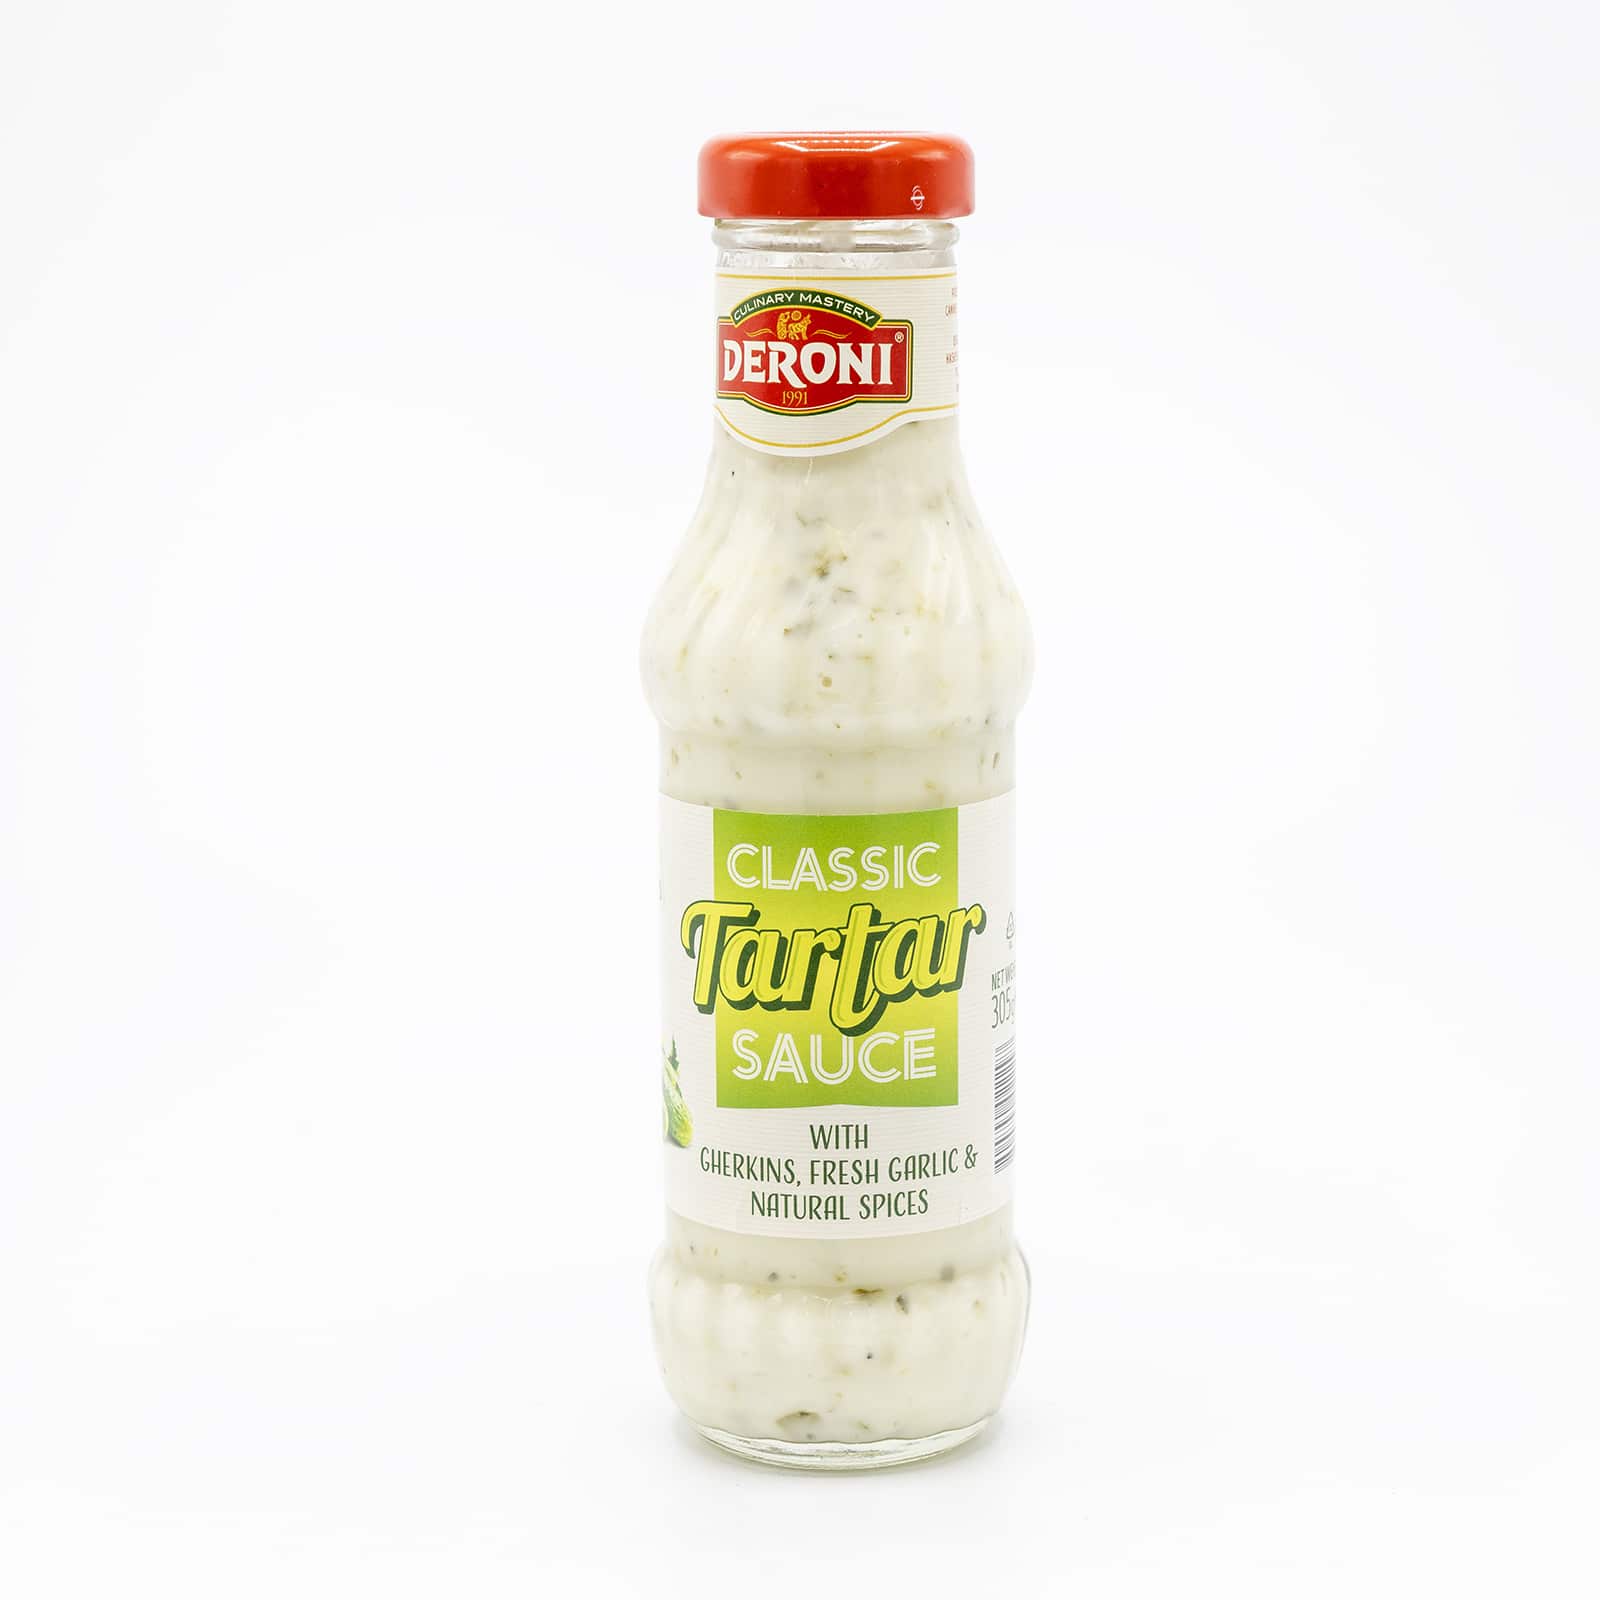 Salad Dressings & Toppings Archives - European Food Express